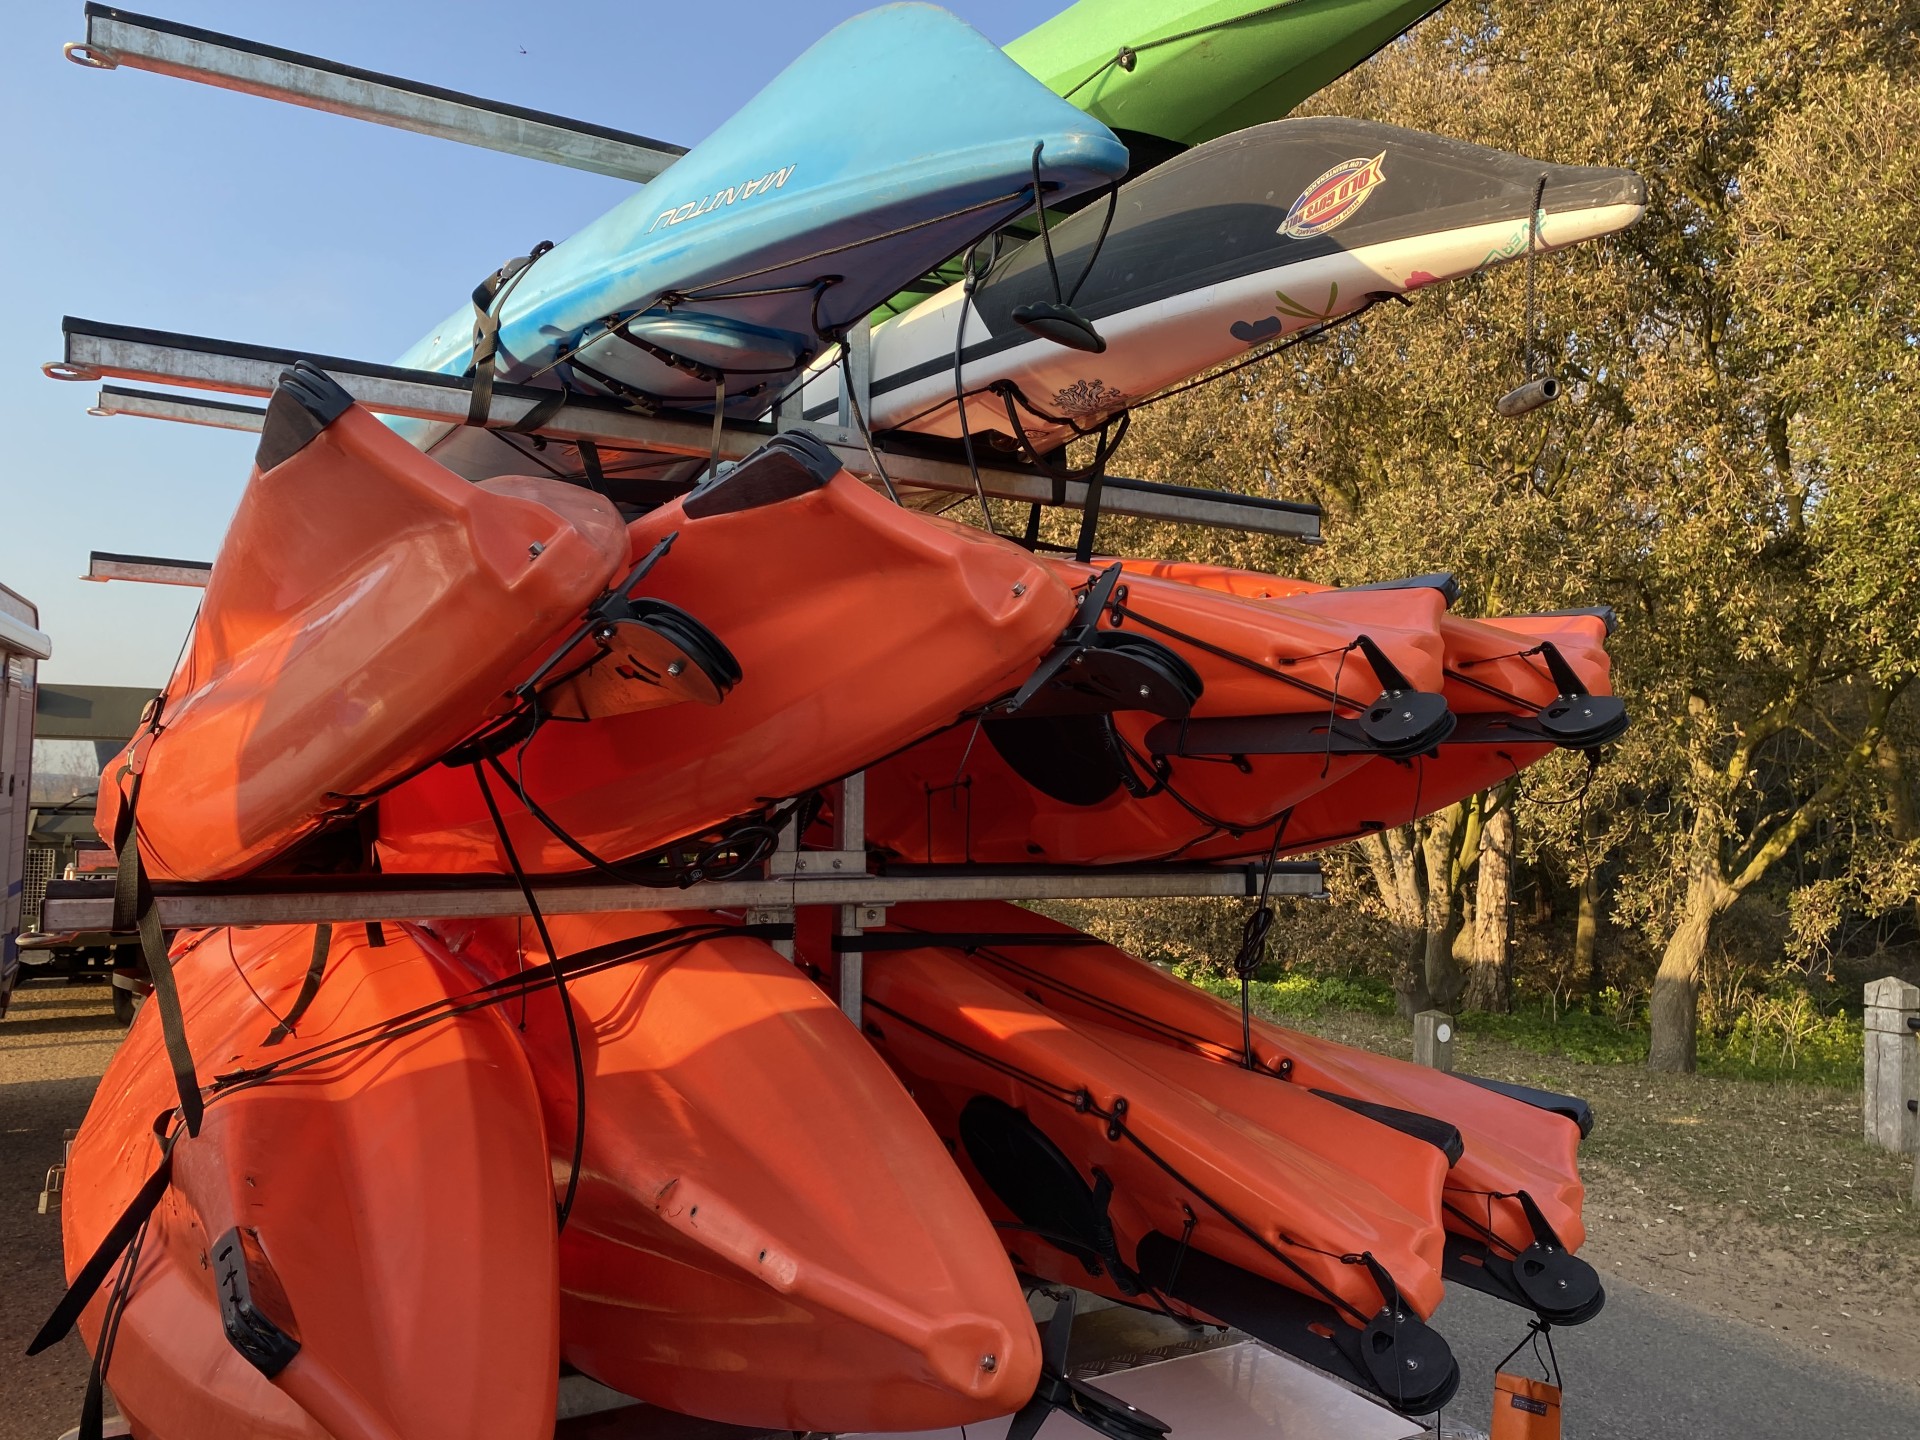 Kayaks packed on a trailer.